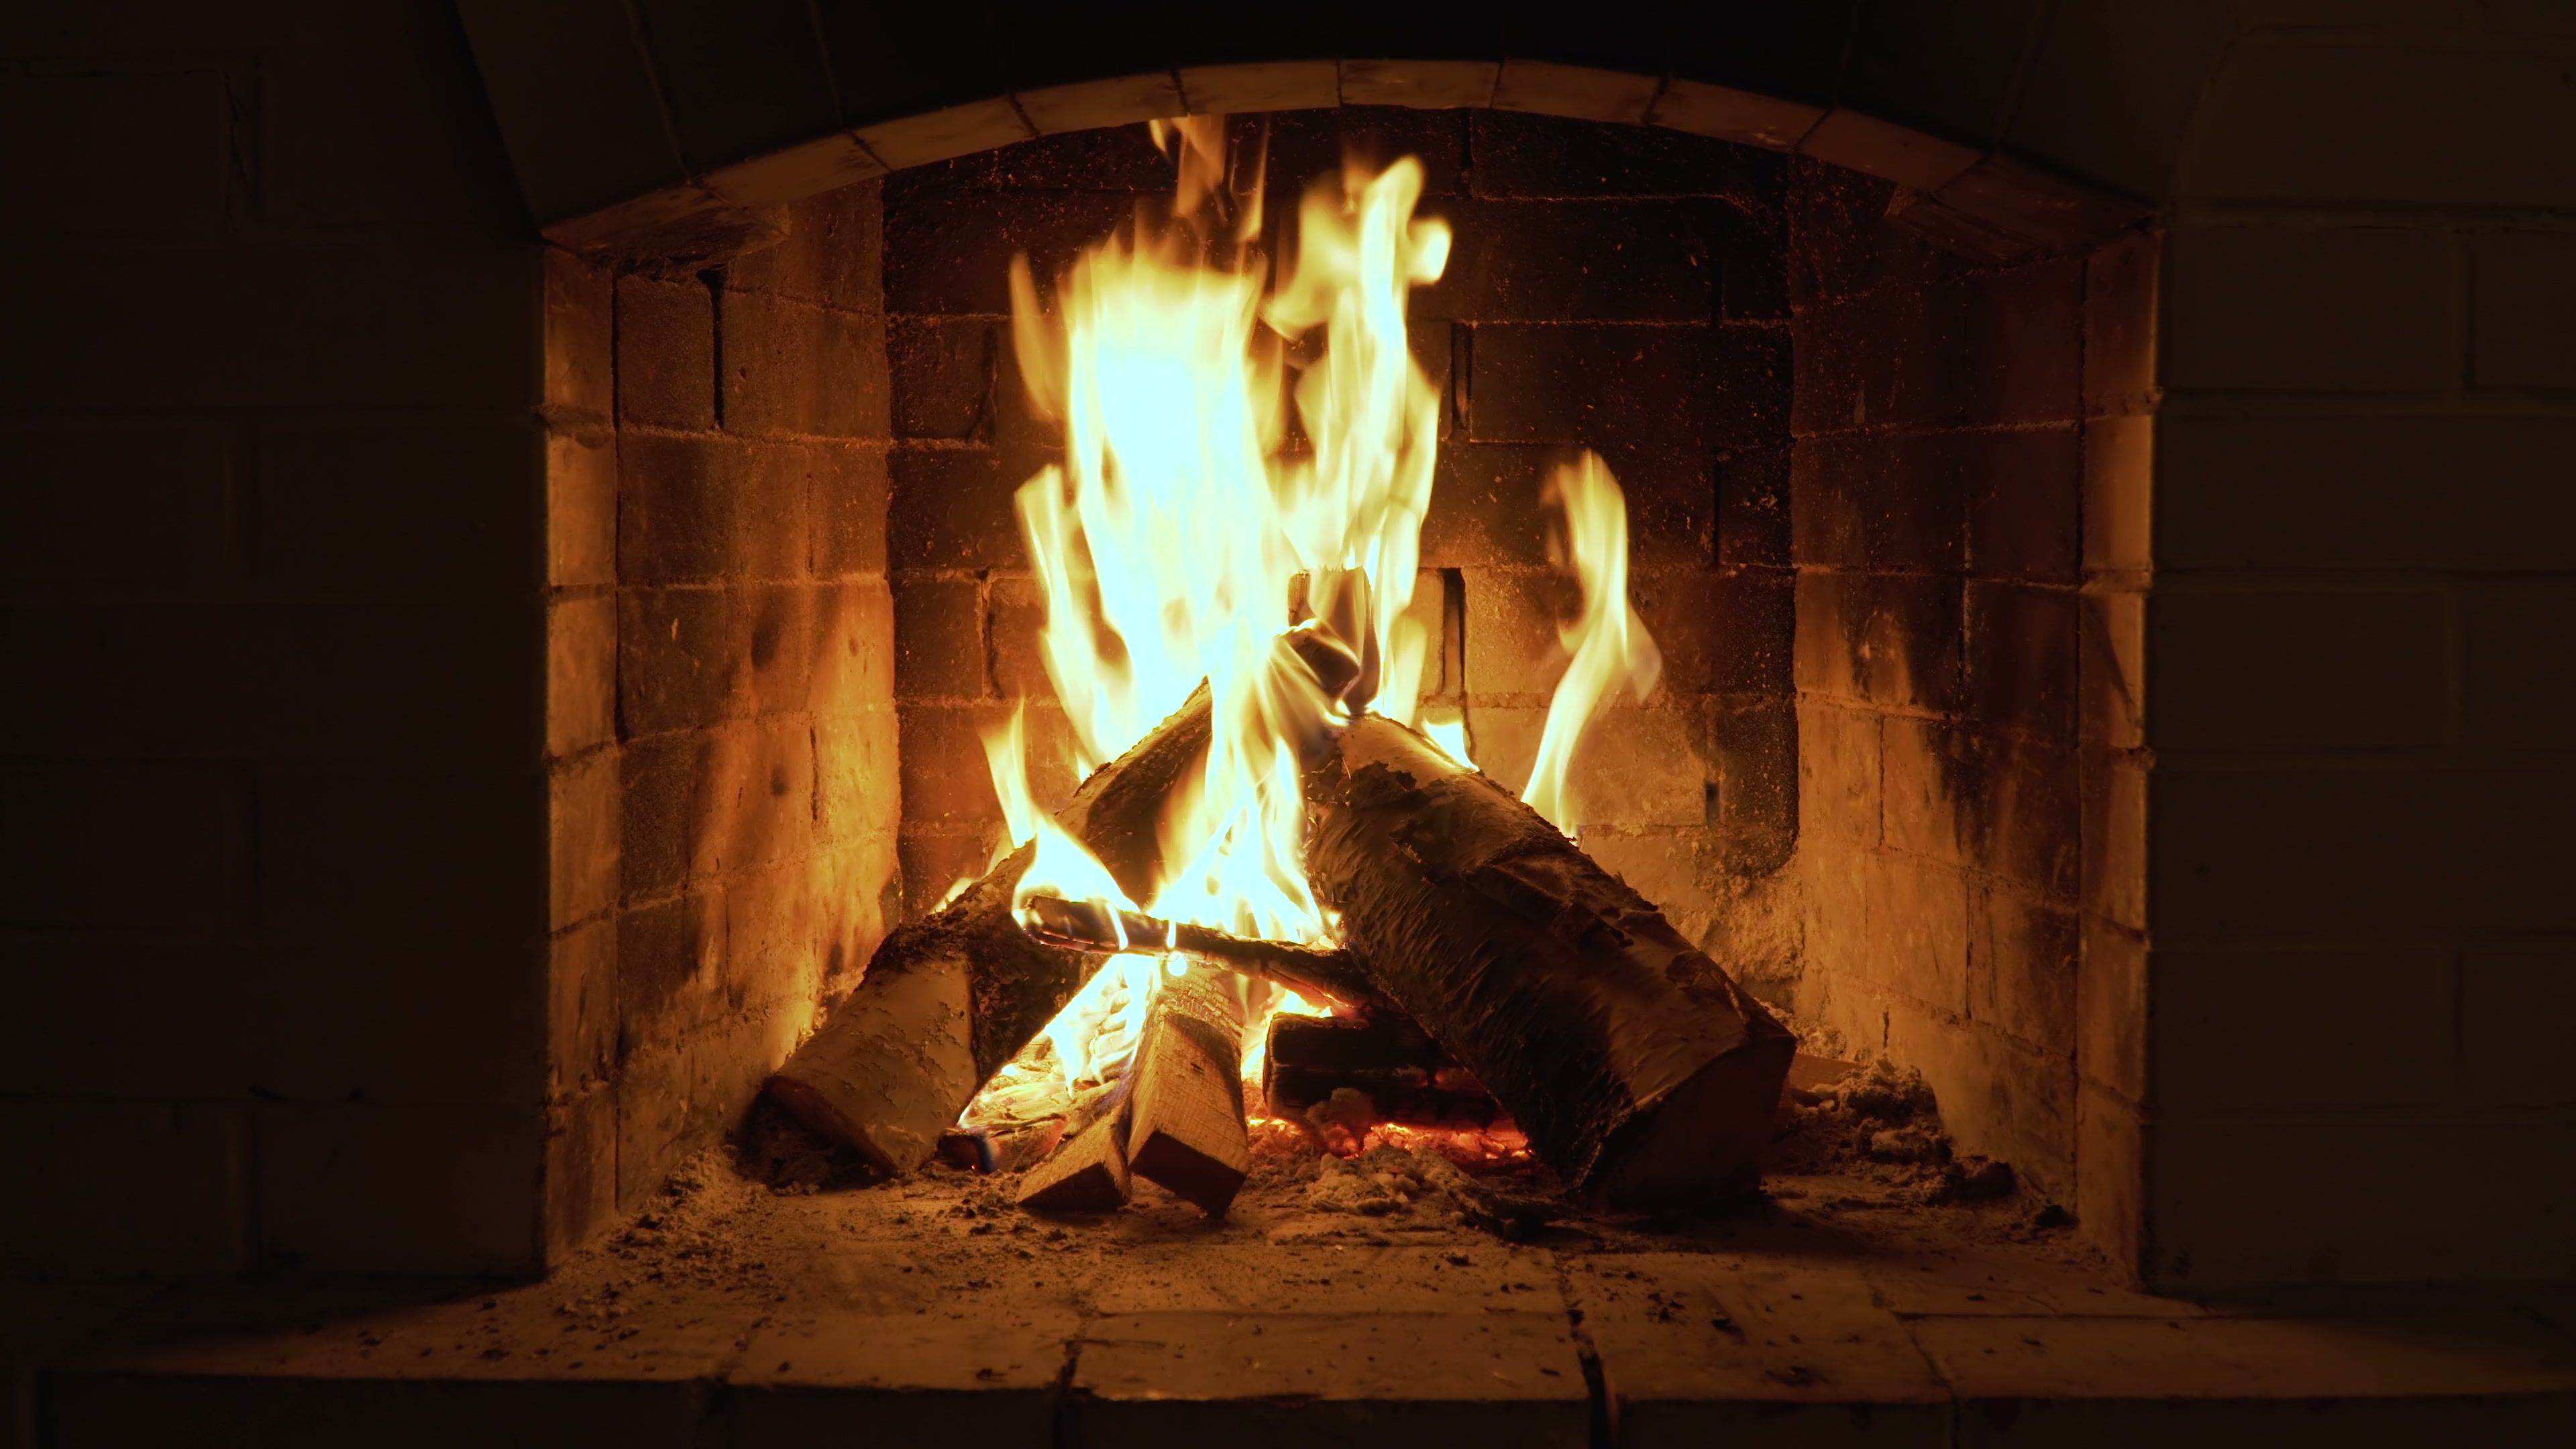 Burning Wood In Fireplace Awesome Burning Fire In the Fireplace Wood and Embers In the